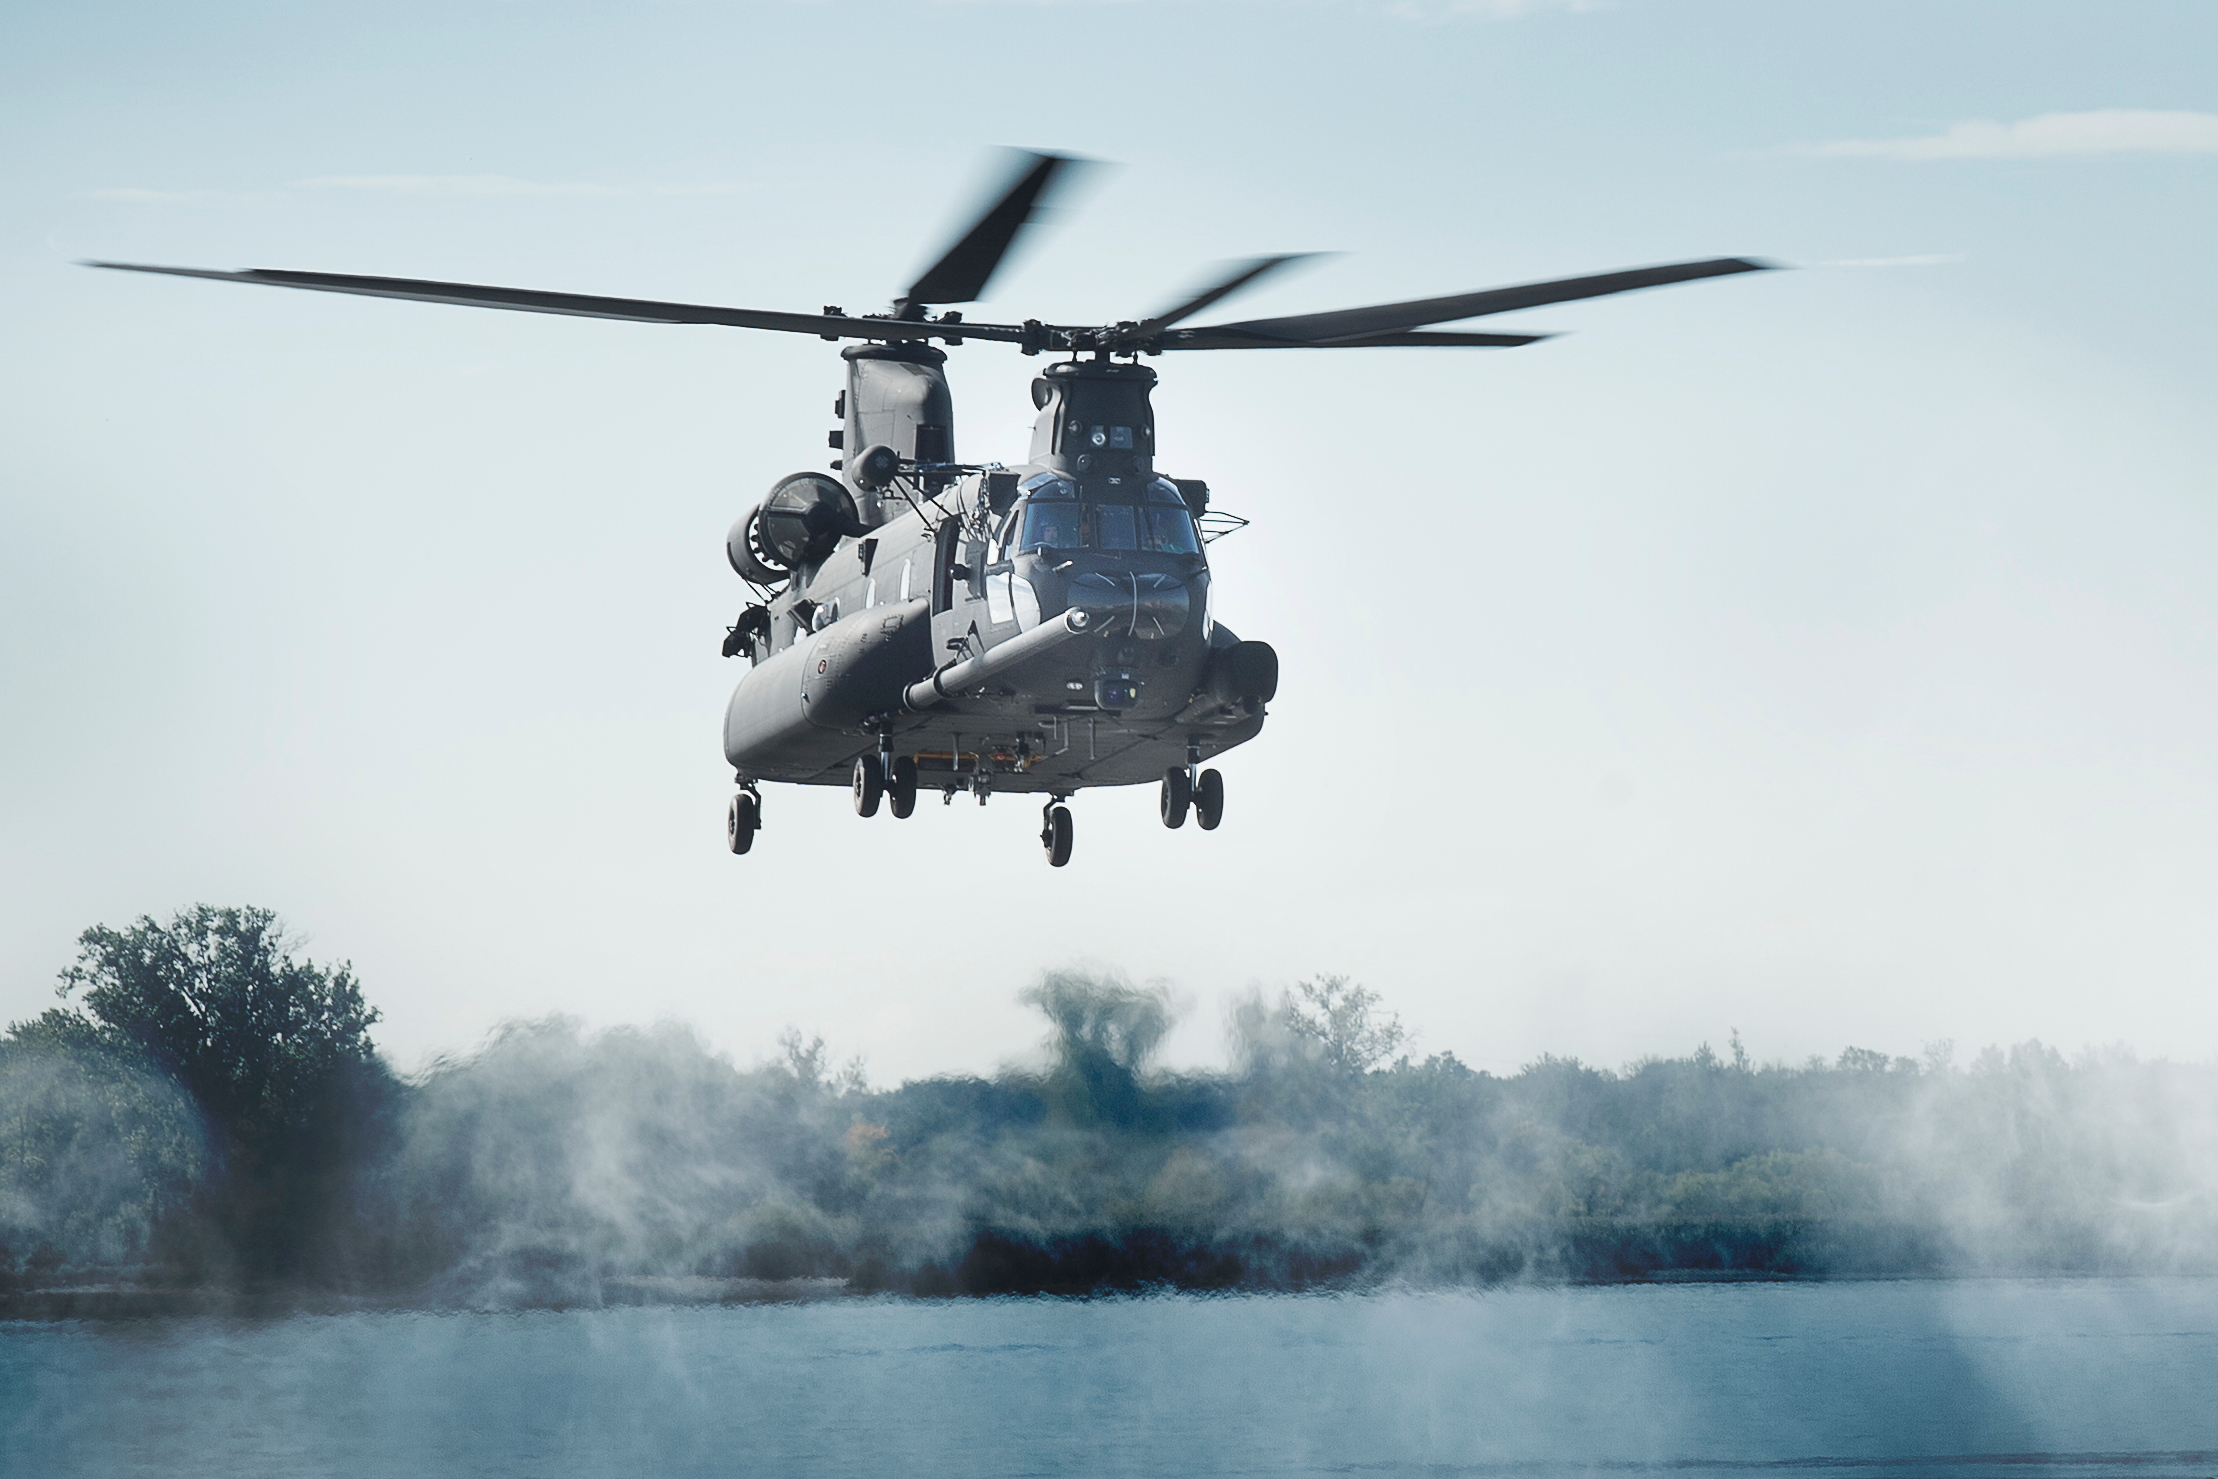 Boeing will deliver four MH-47G Chinook helicopters, the special operations variant, under a new contract with the U.S. Army. These aircraft will be the first to feature Block II upgrades that will eventually be incorporated across the U.S. H-47 Chinook fleet. (Boeing photo). Click to enlarge.